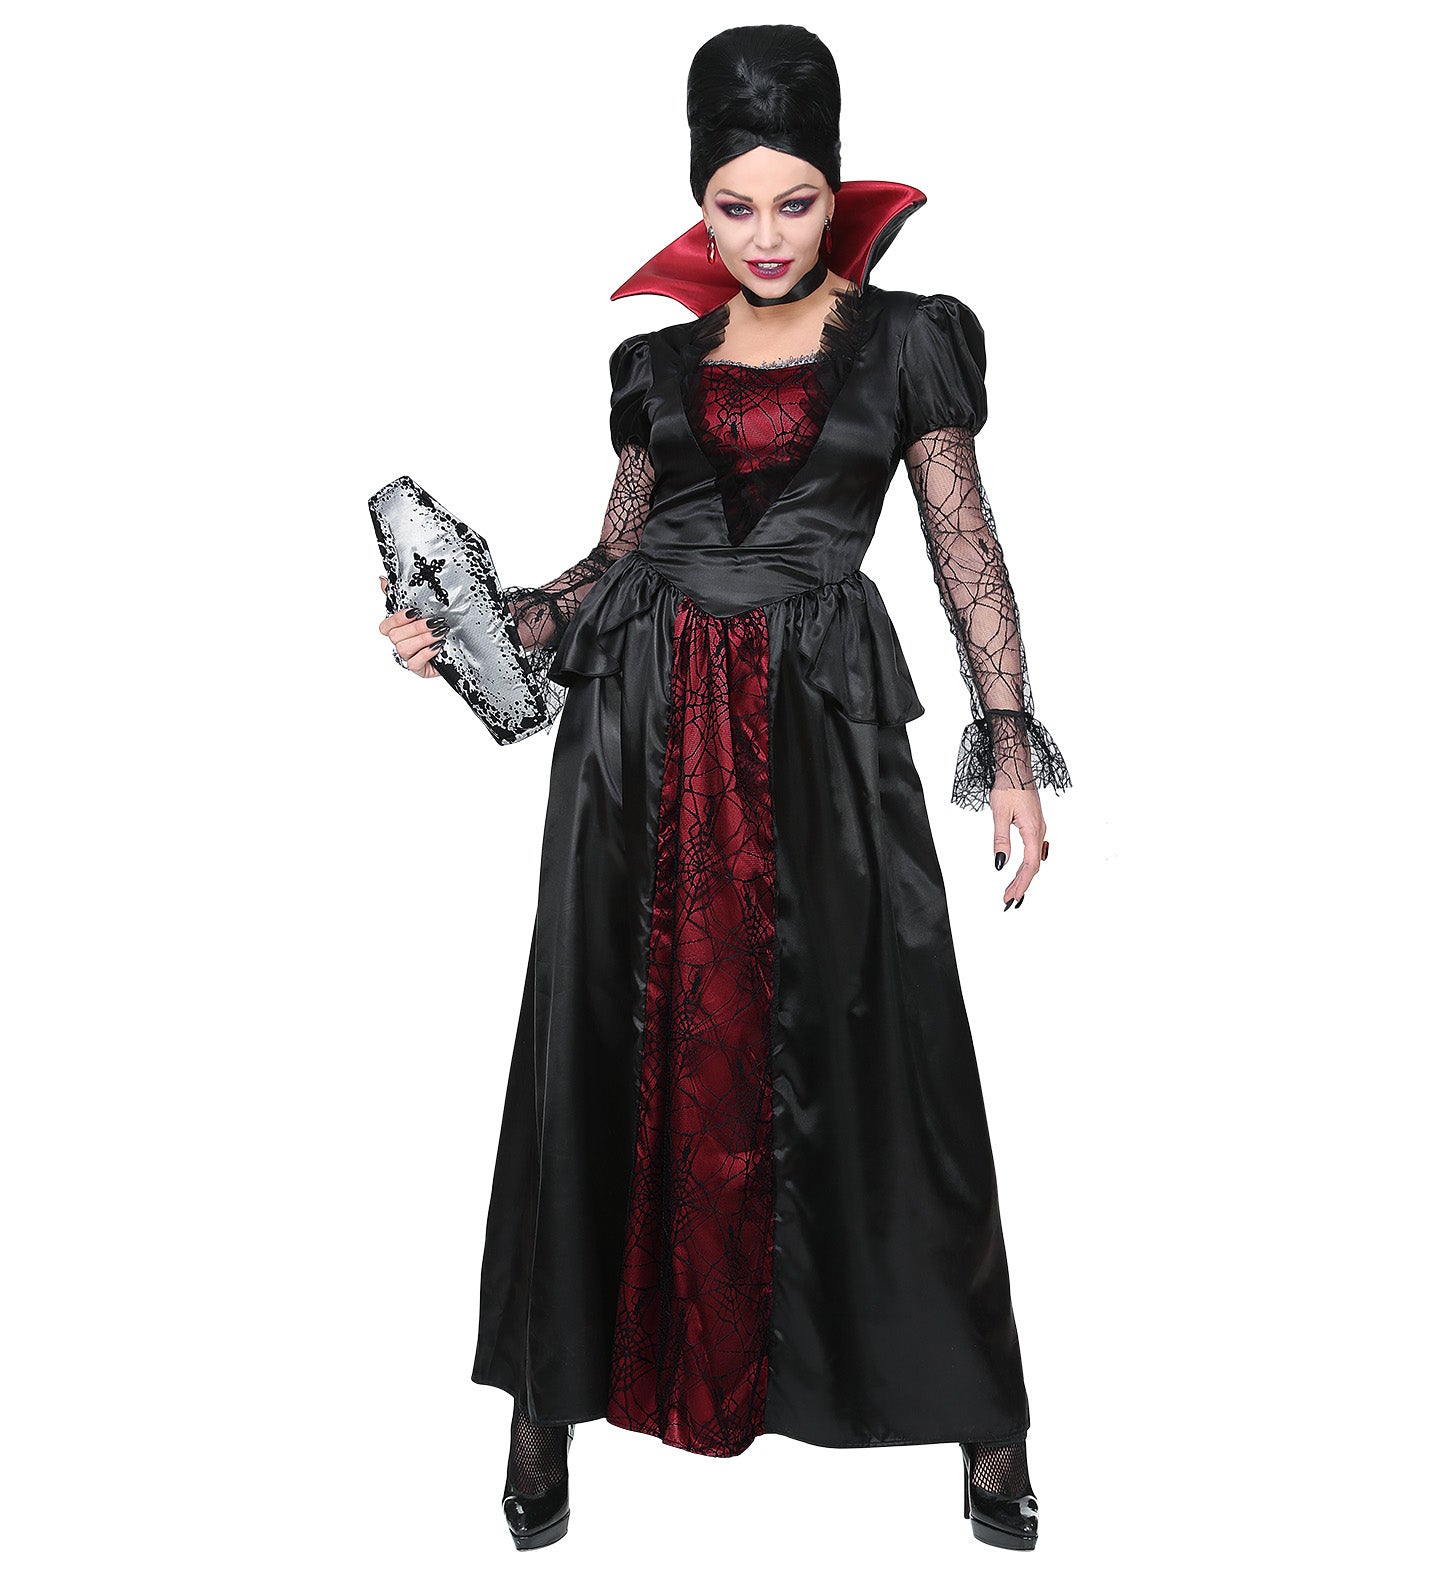 Regal Vampire outfit for women